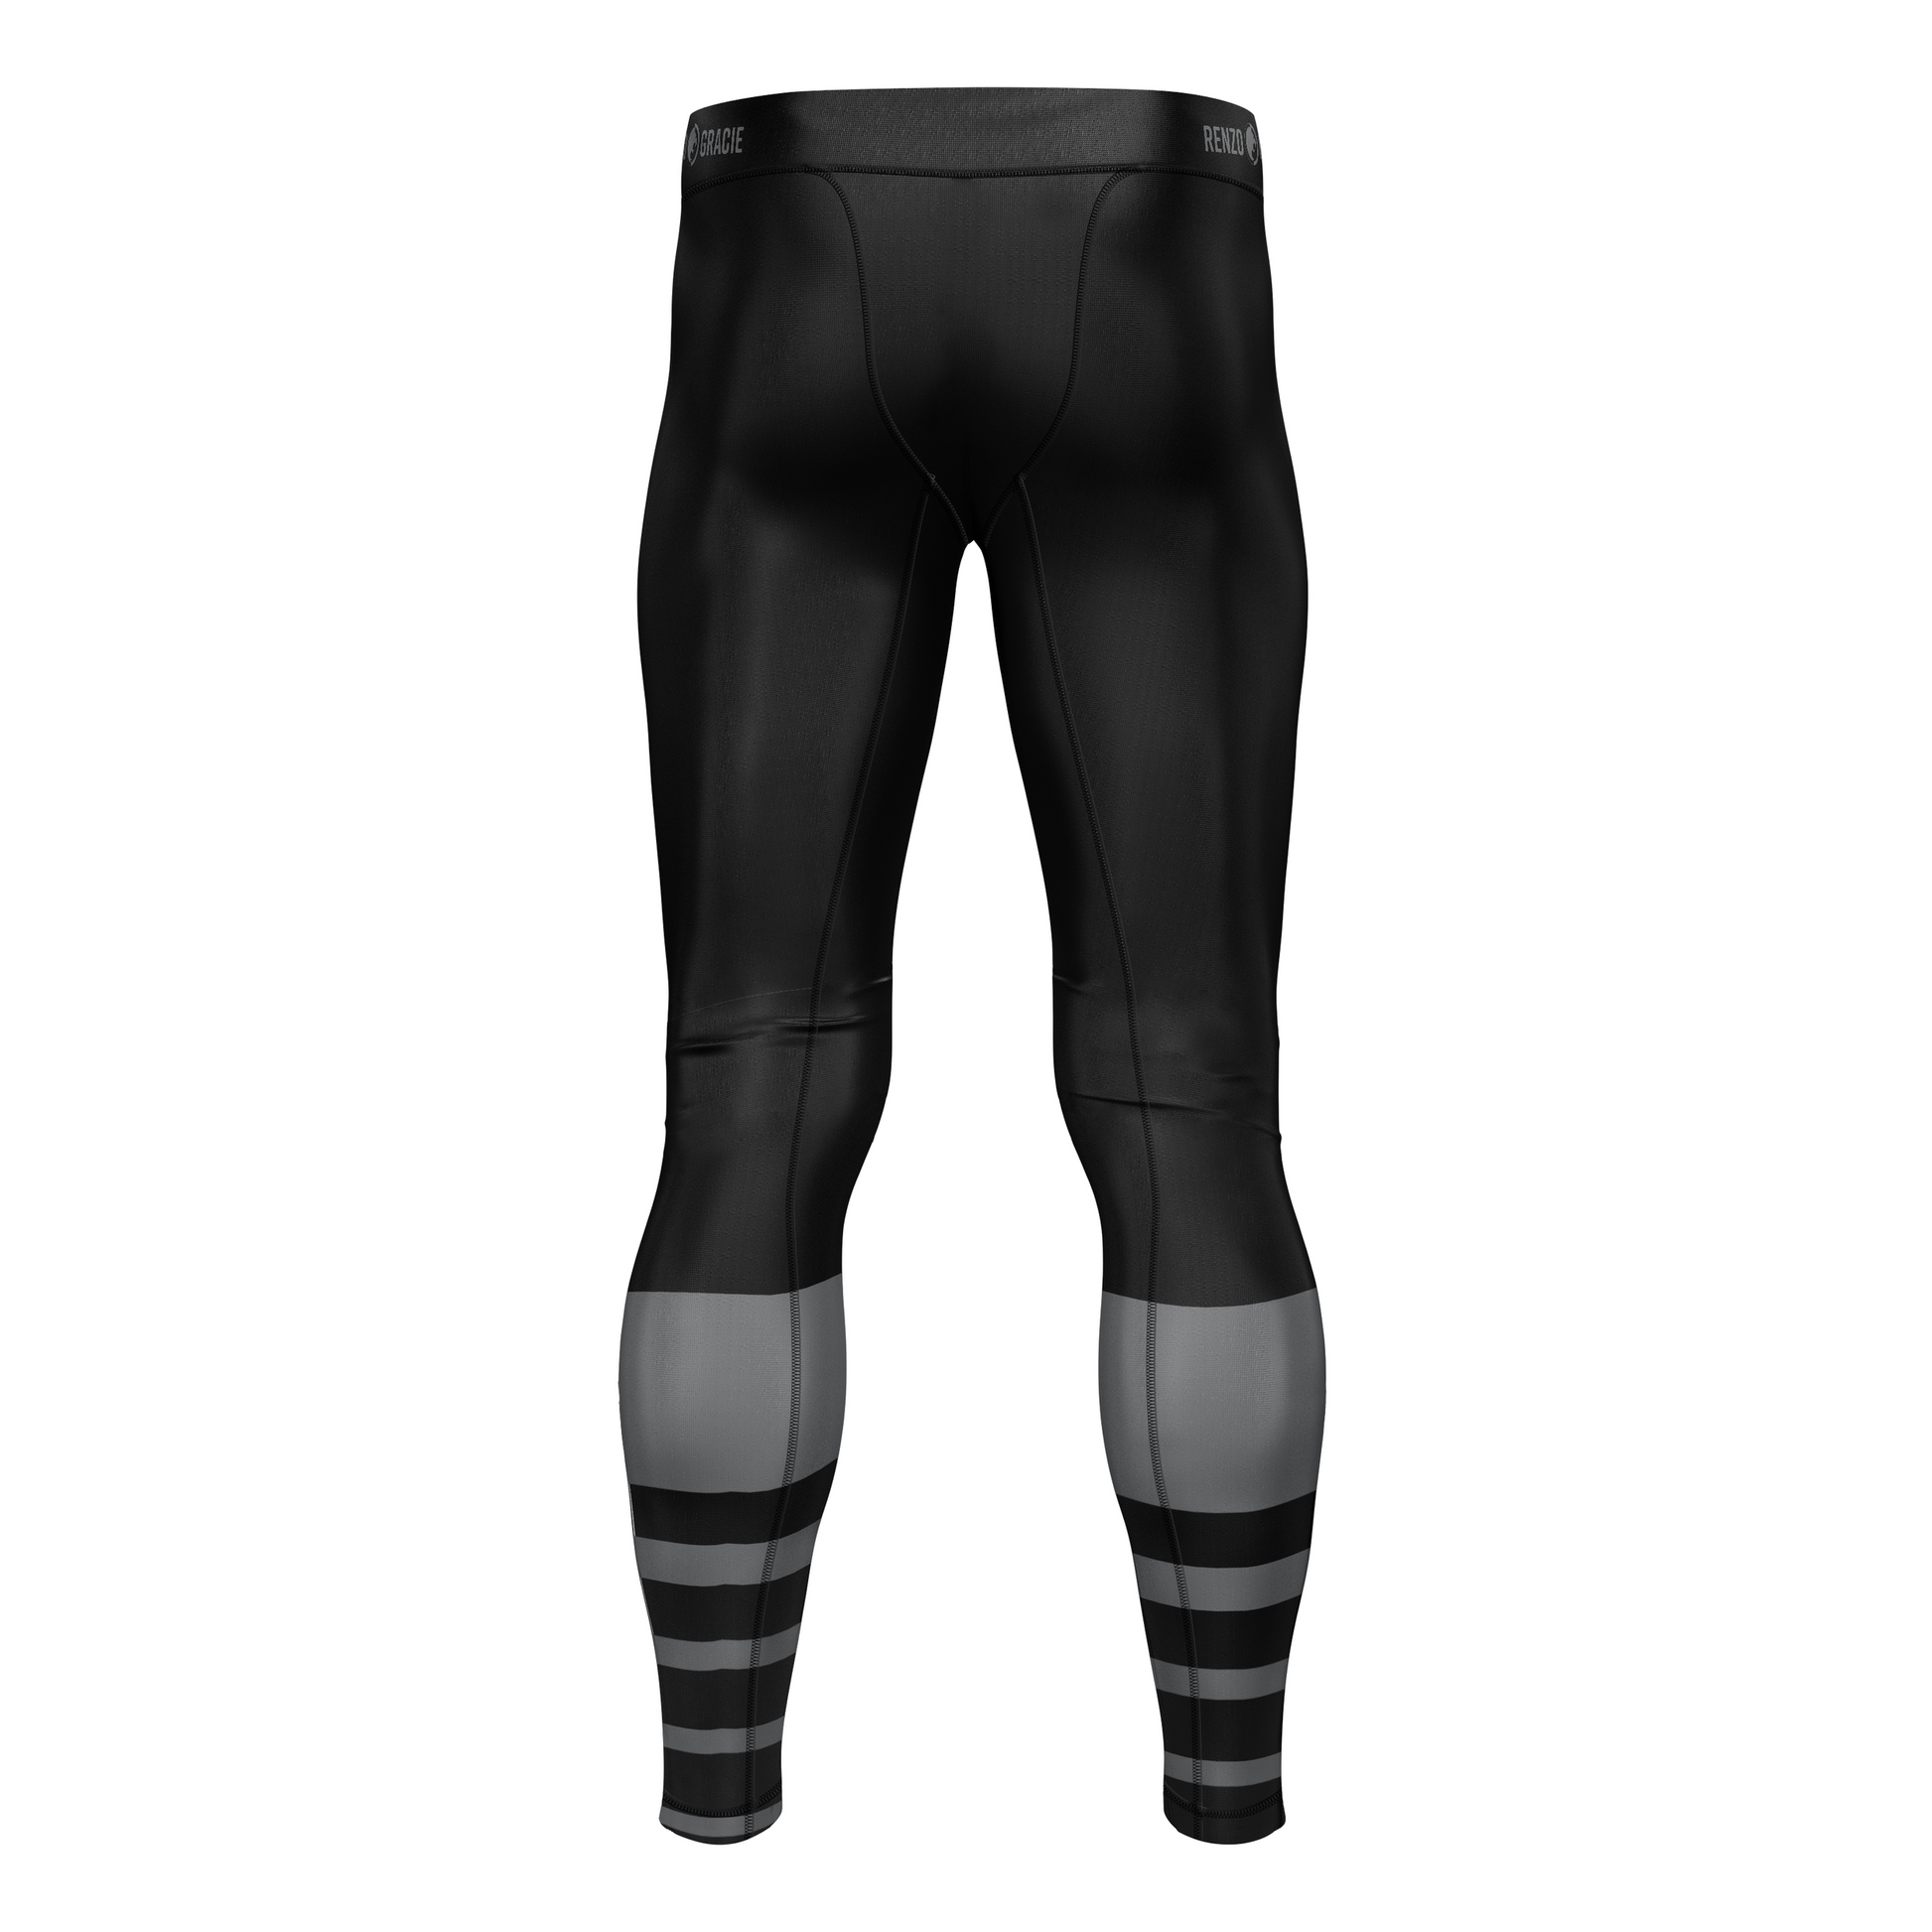 wholesale Renzo Gracie Katy men's grappling tights Standard Issue, black and grey